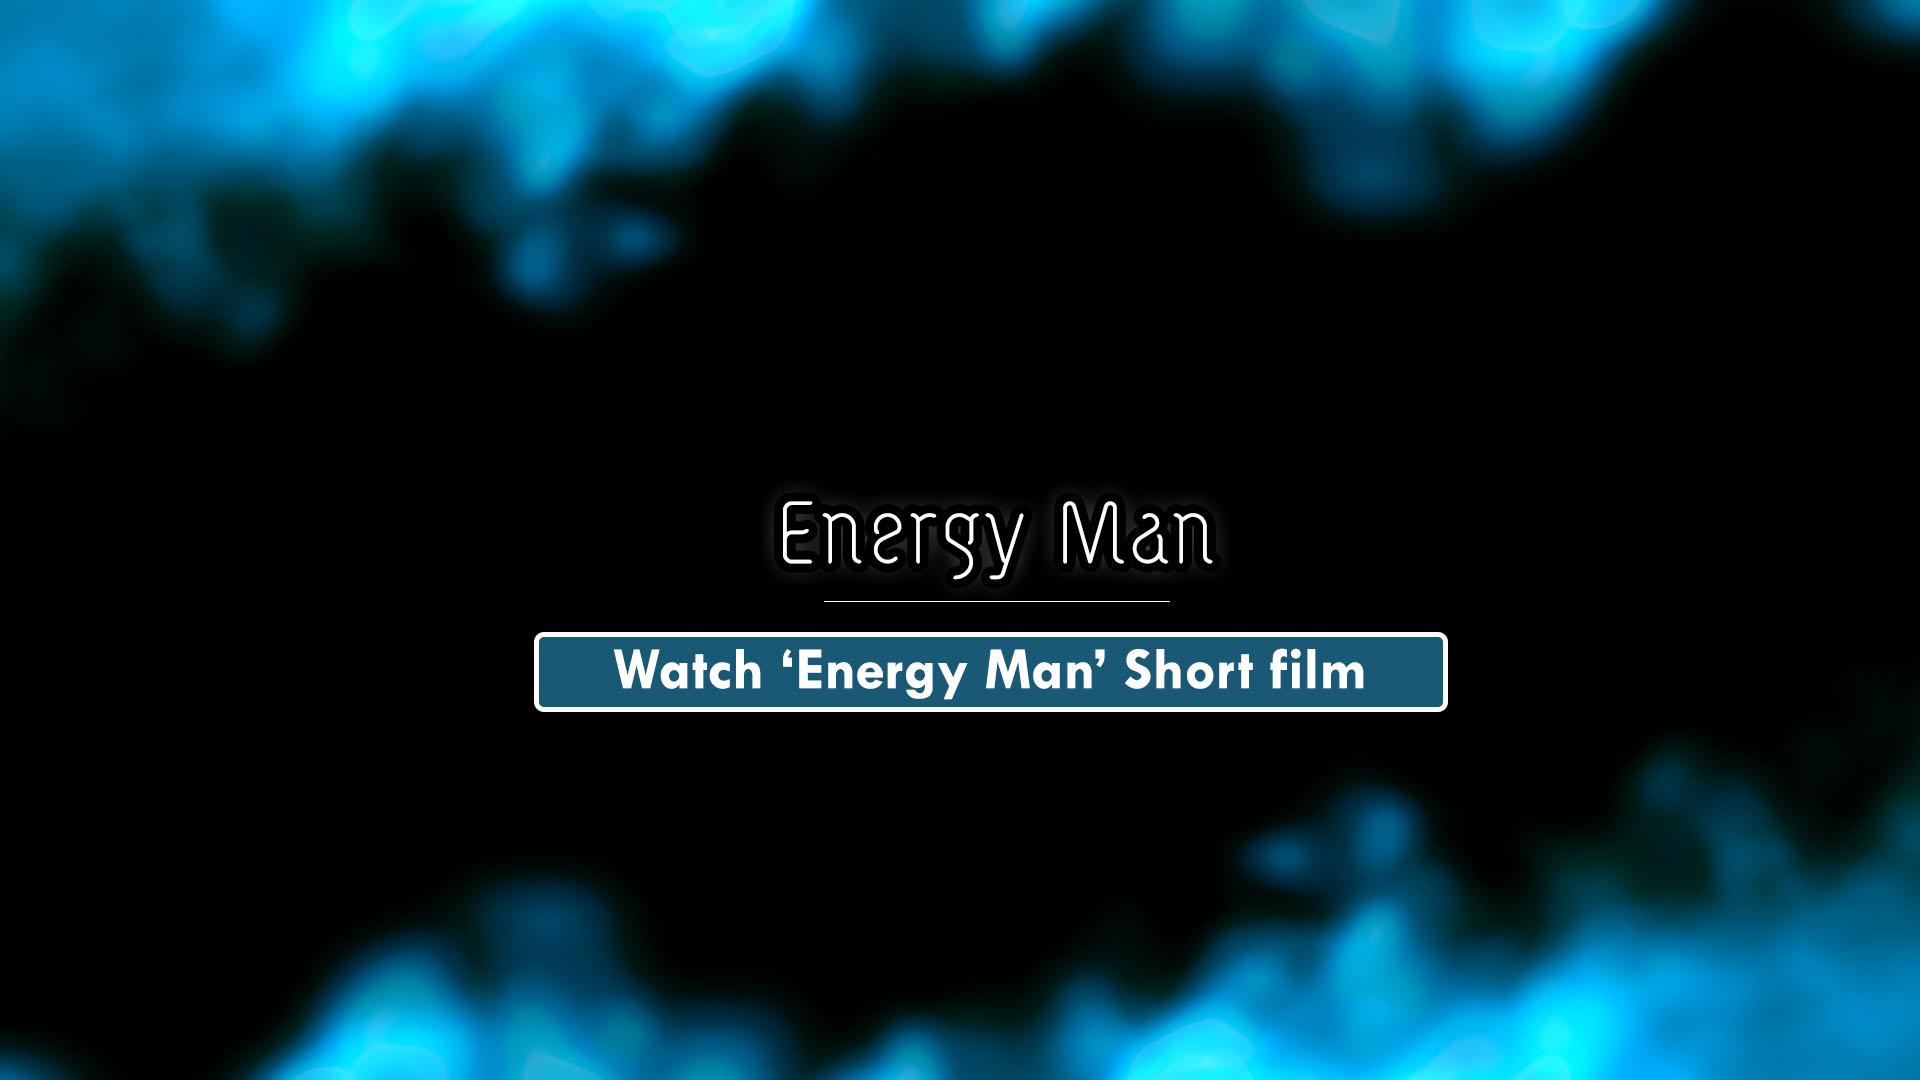 This Film uses VFX Elements used form 'Energy Stock-FX' Product